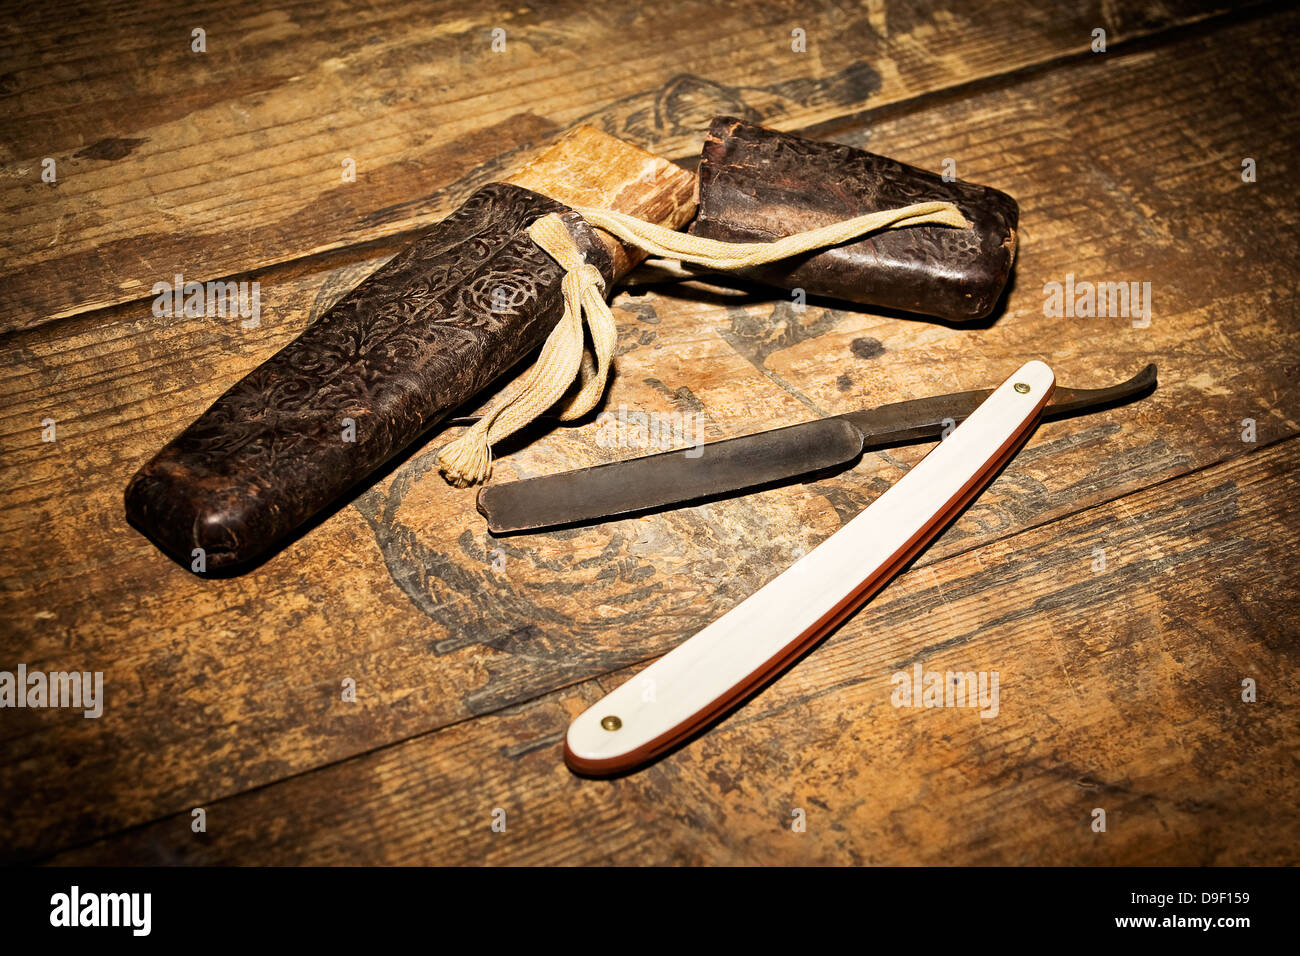 Razor on a wooden box Razor on a wooden punch Stock Photo